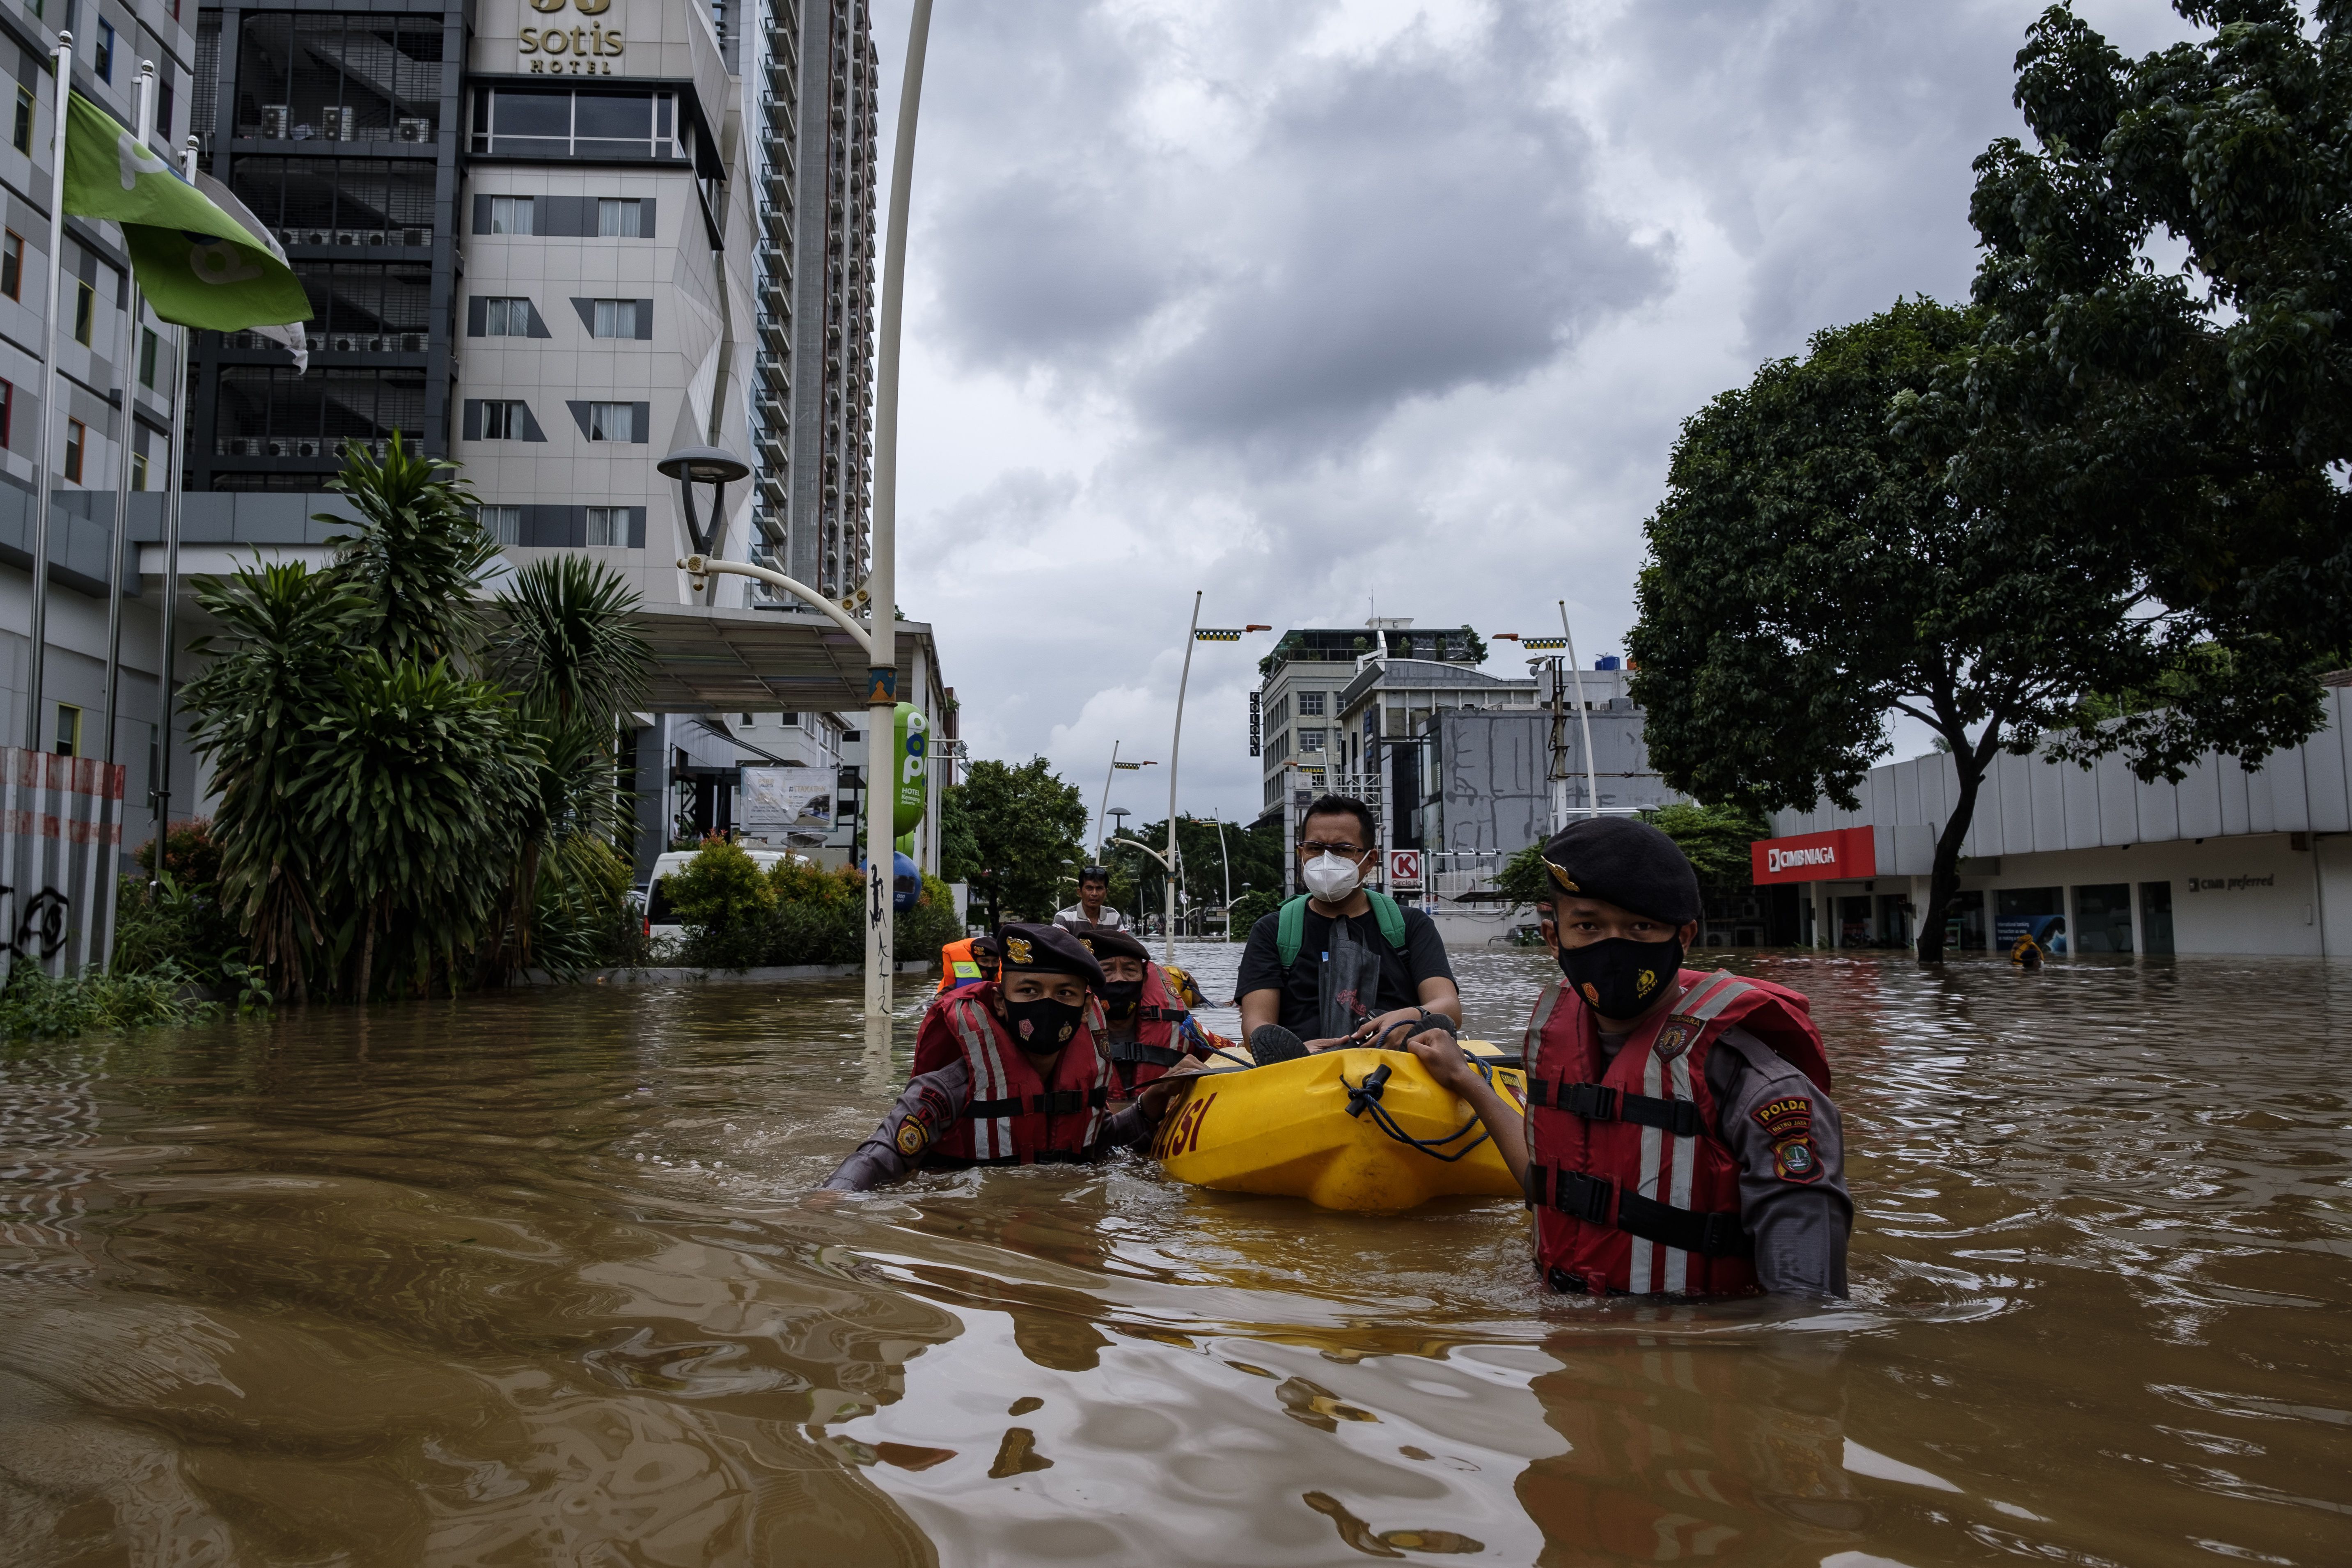 Policemen evacuate a man from a flooded business district on February 20, 2021 in Jakarta, Indonesia.